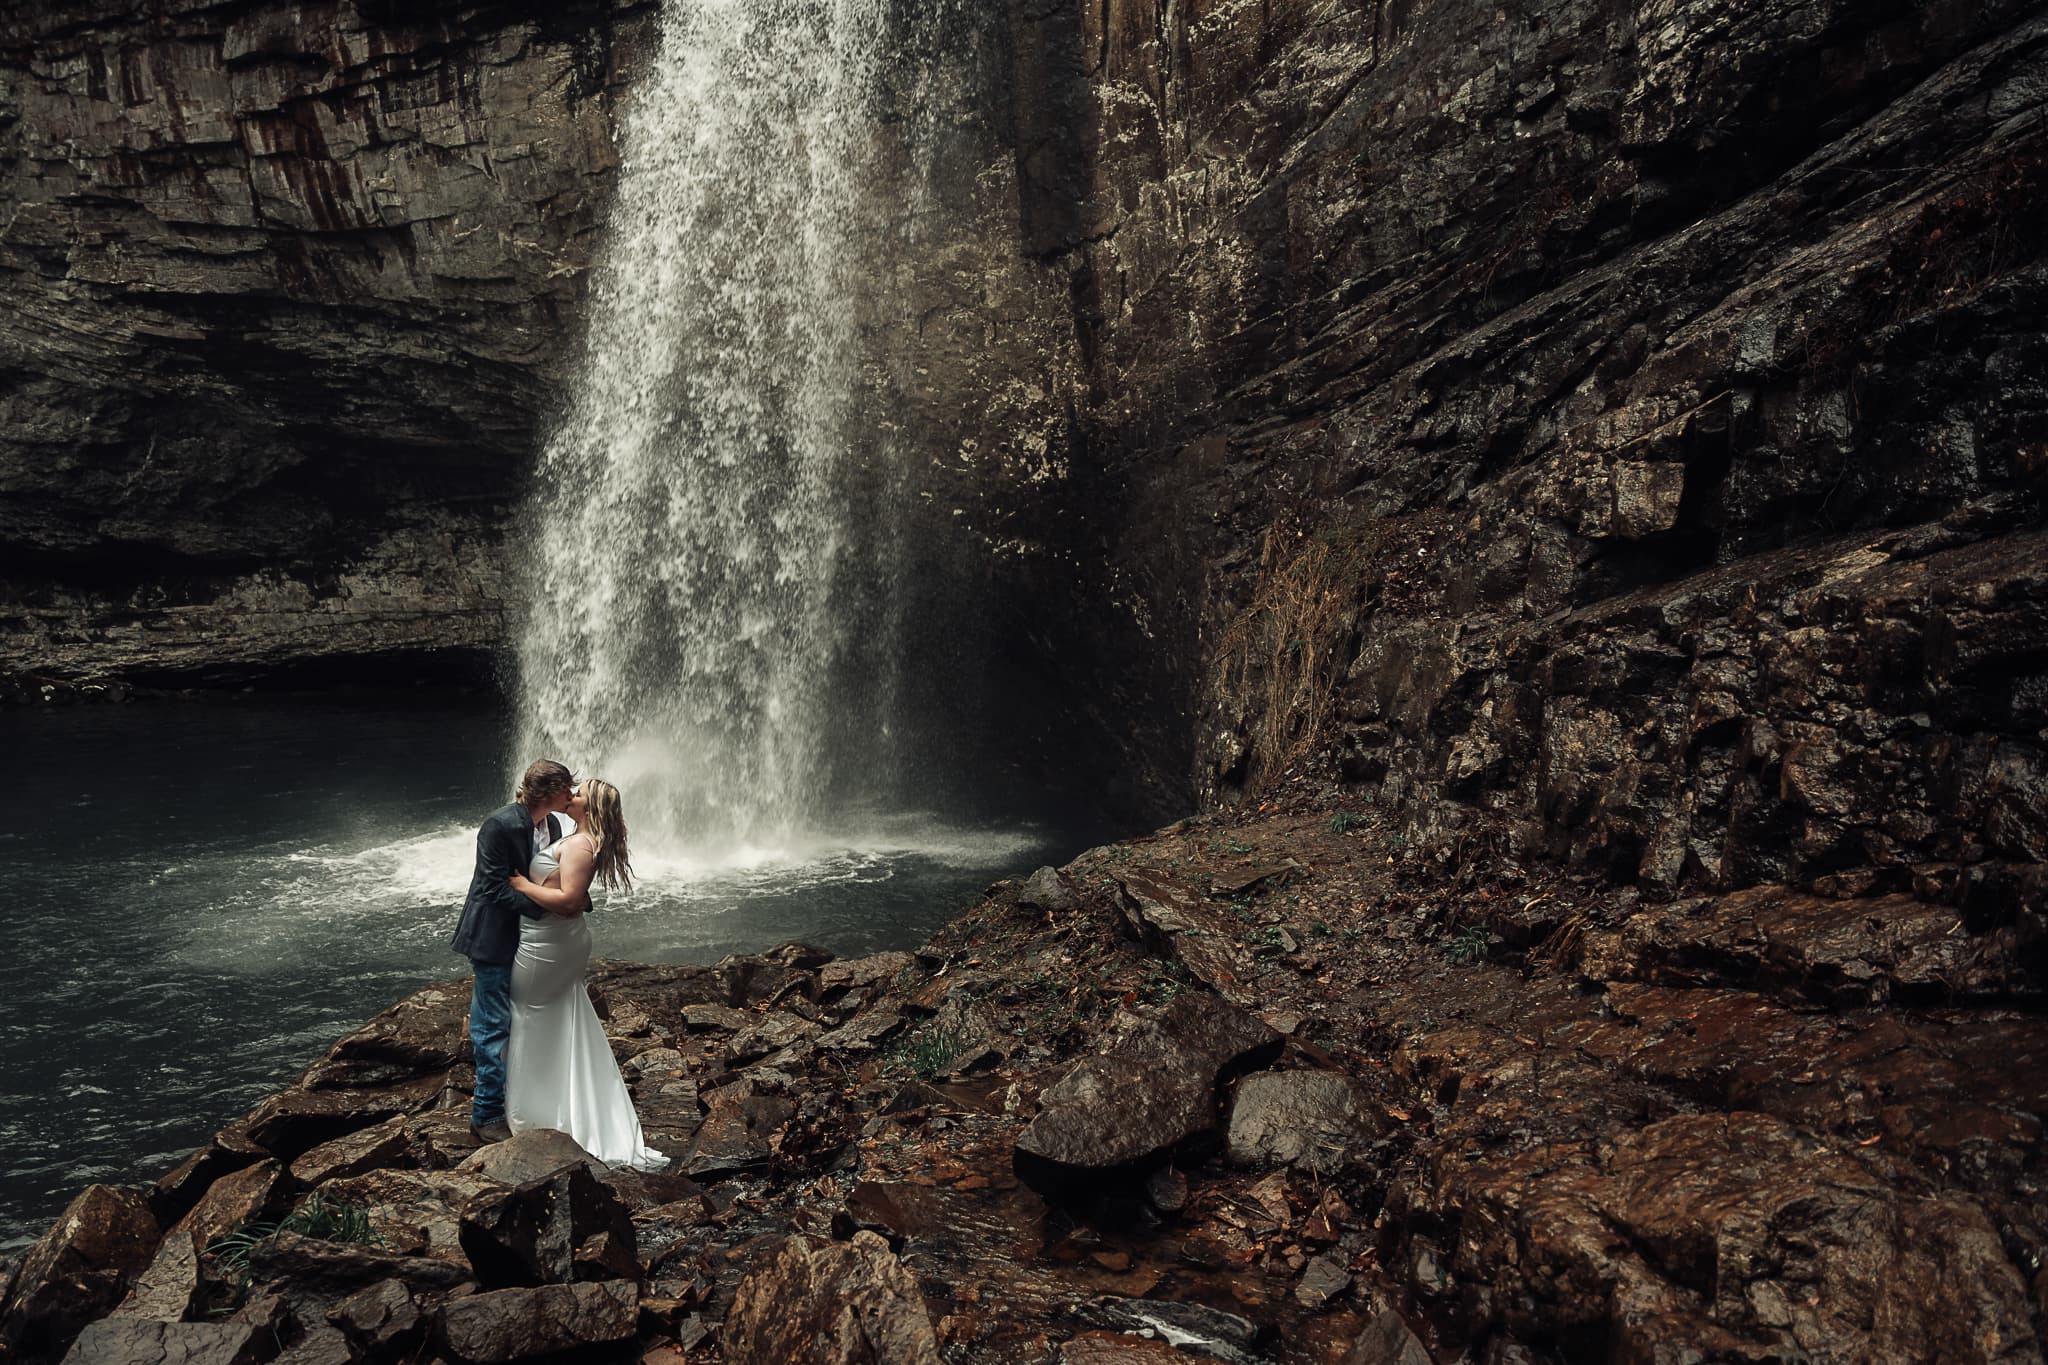 Couple kisses in front of Foster Falls during their rainy Tennessee waterfall elopement ceremony.